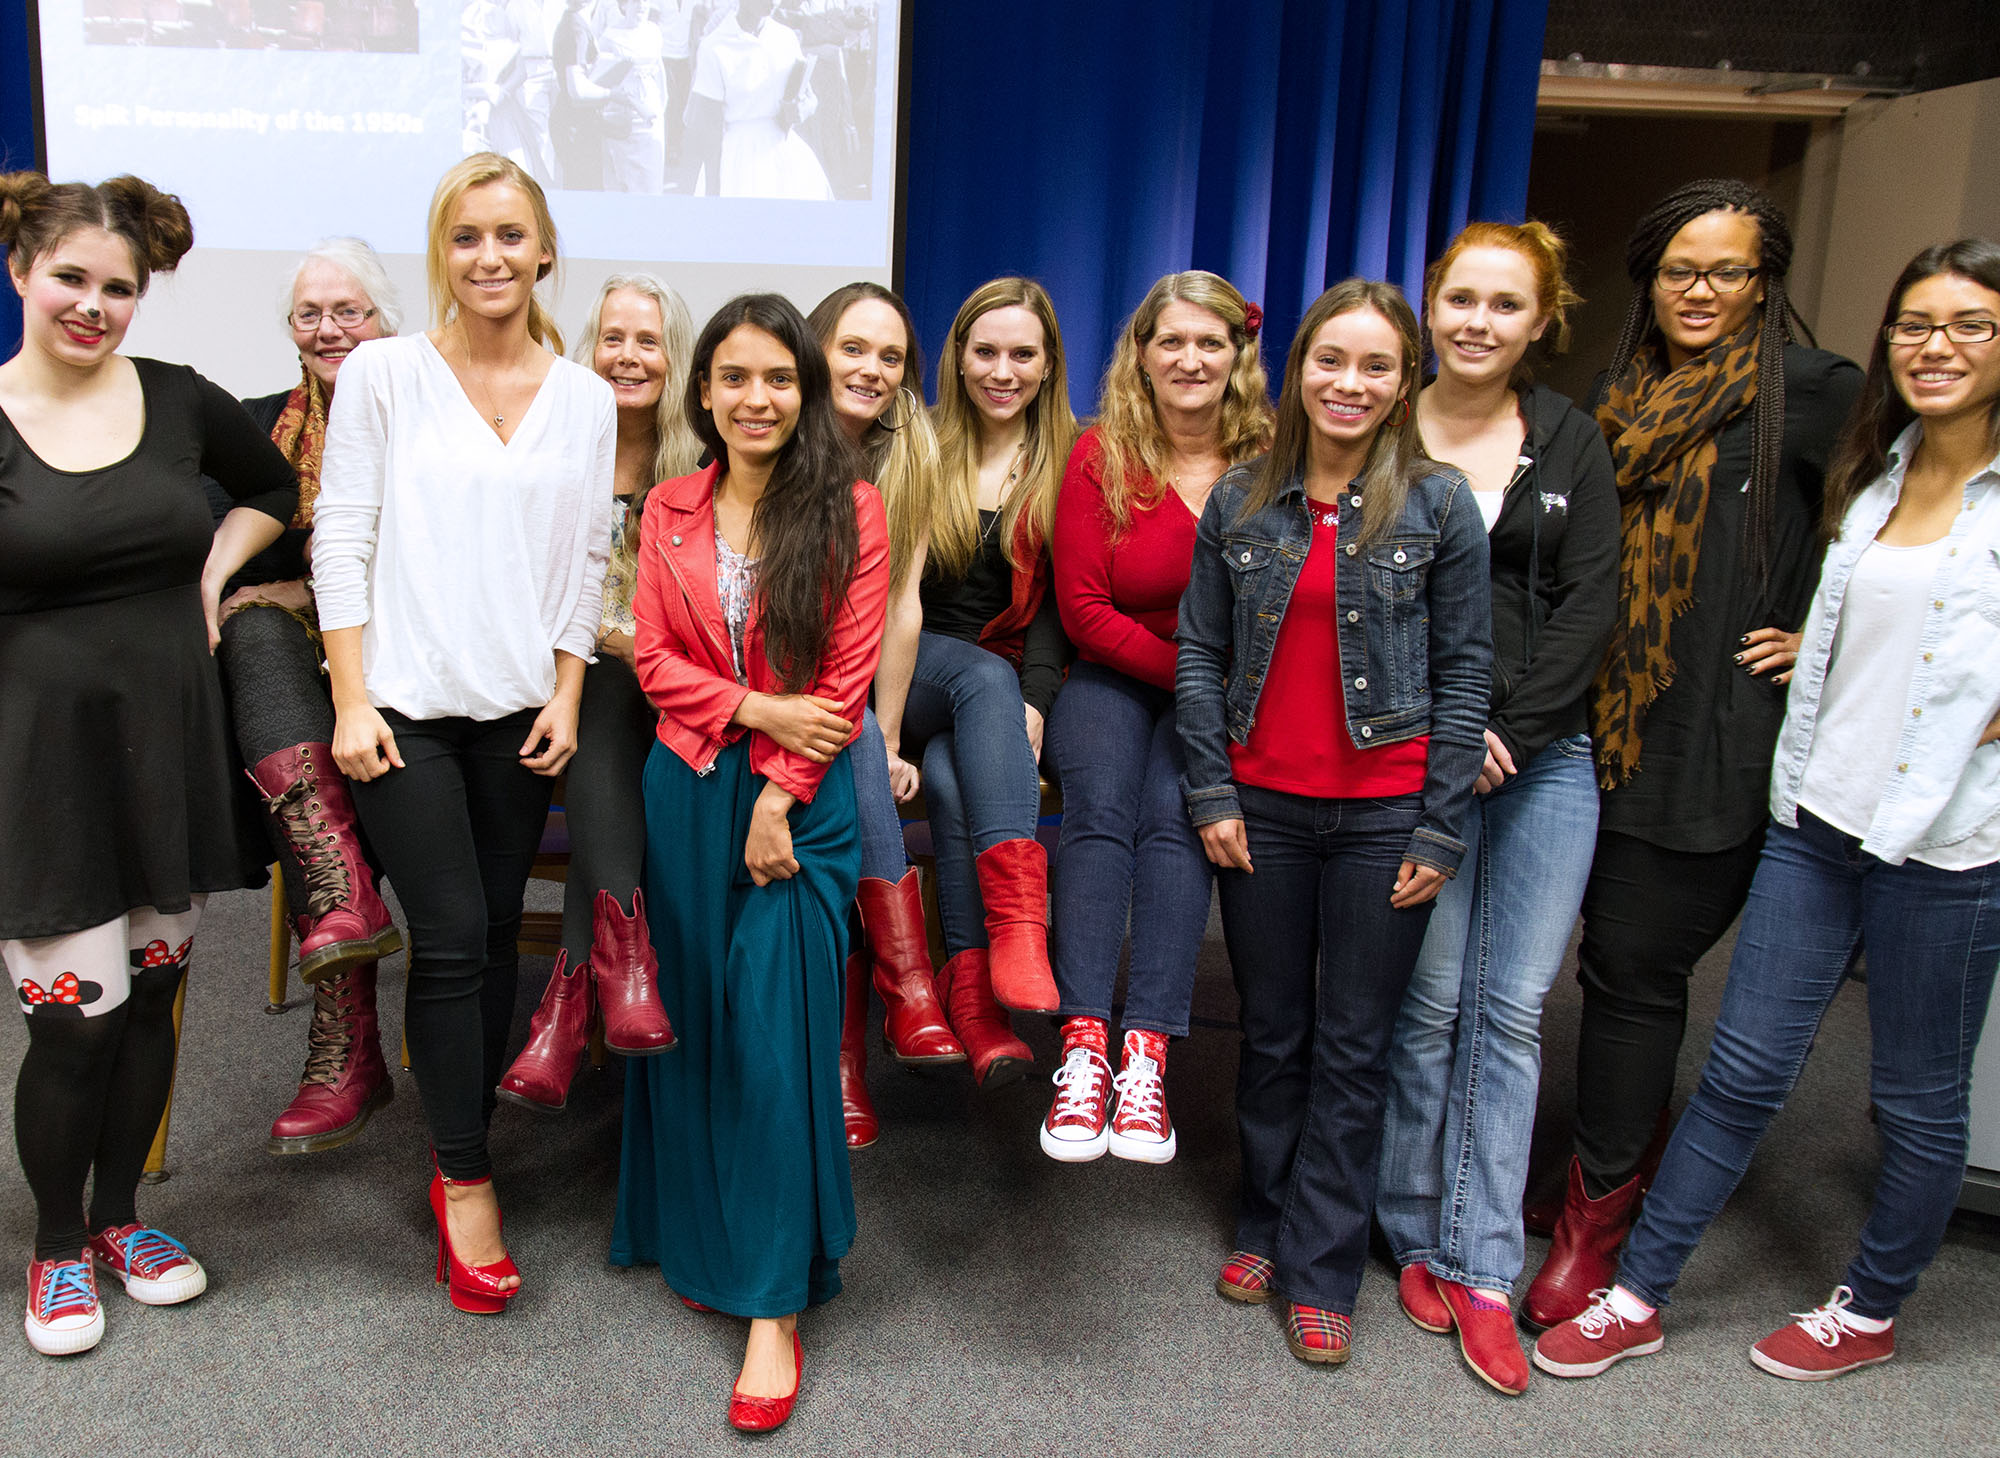 Women and Gender Studies students wearing red shoes to celebrate International Women's Day at Sierra College